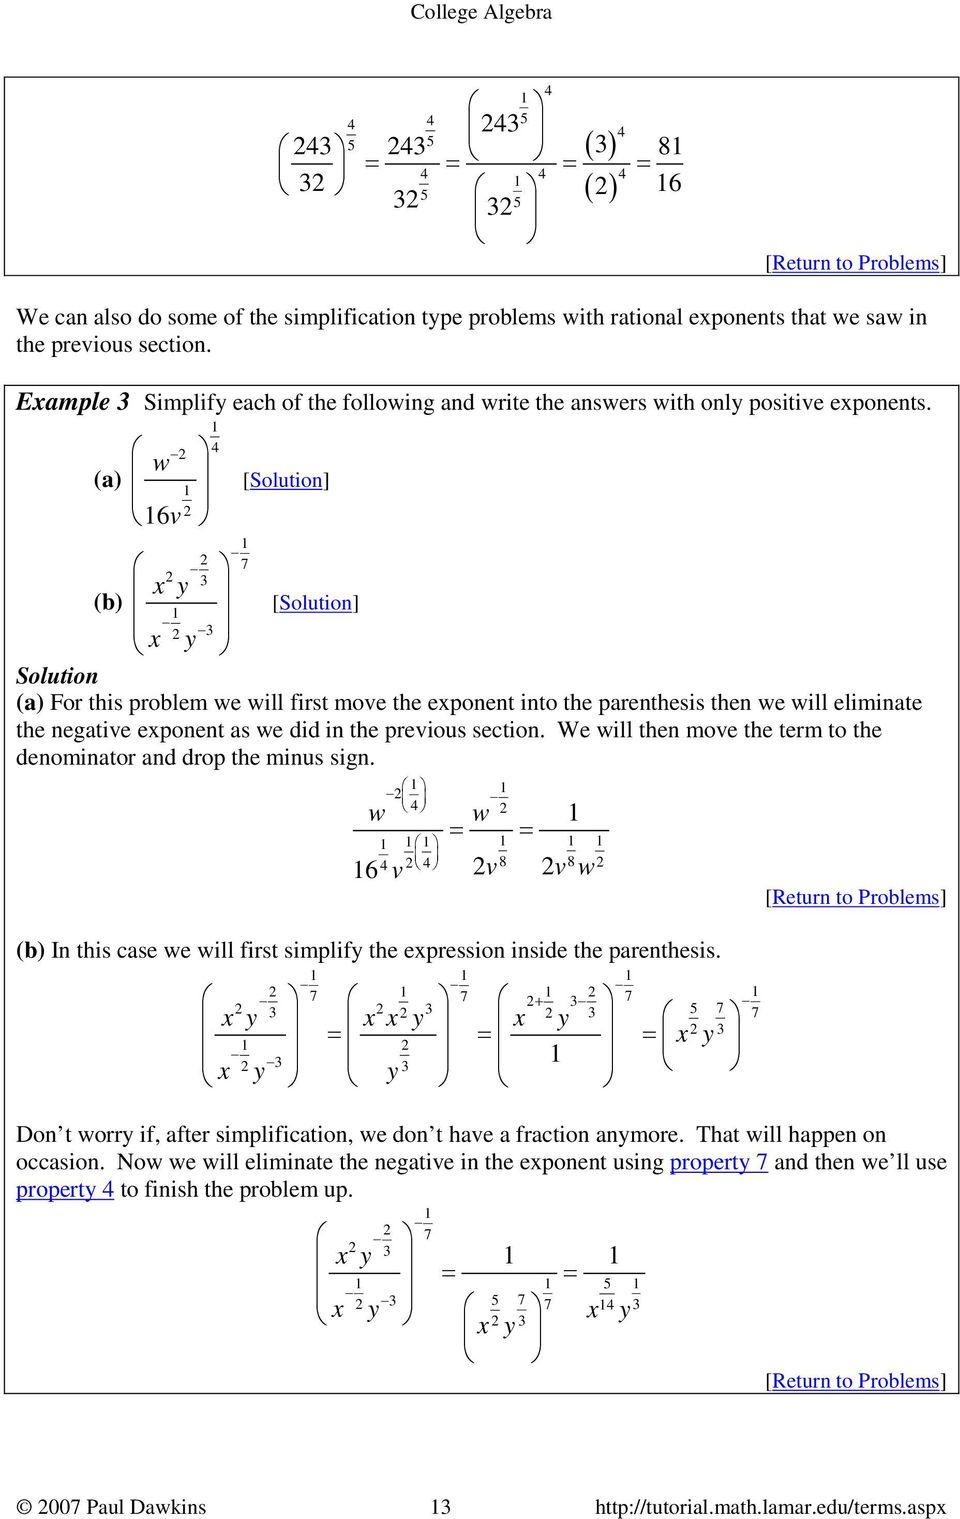 w (a) 6v 4 7 3 [Solution] (b) xy [Solution] 3 x y Solution (a) For this problem we will first move the exponent into the parenthesis then we will eliminate the negative exponent as we did in the